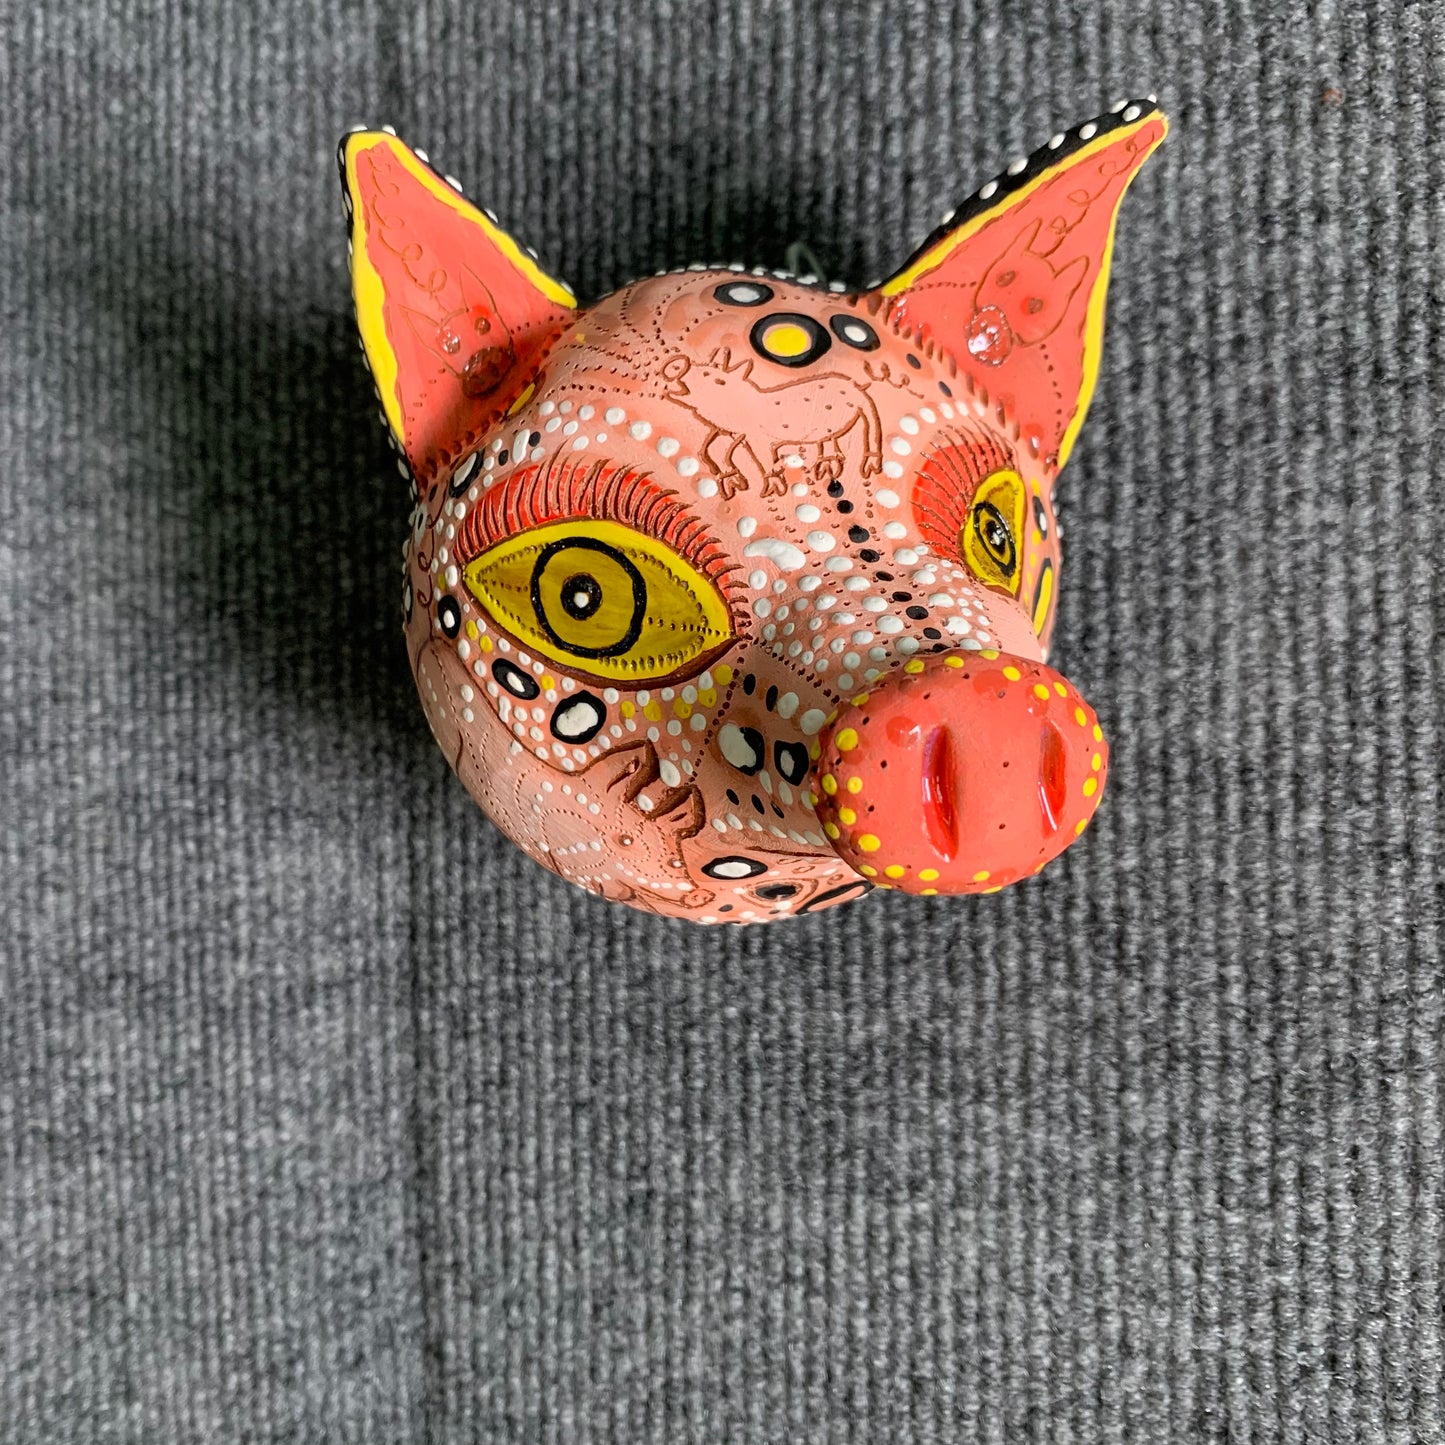 This little piggy wall hanging